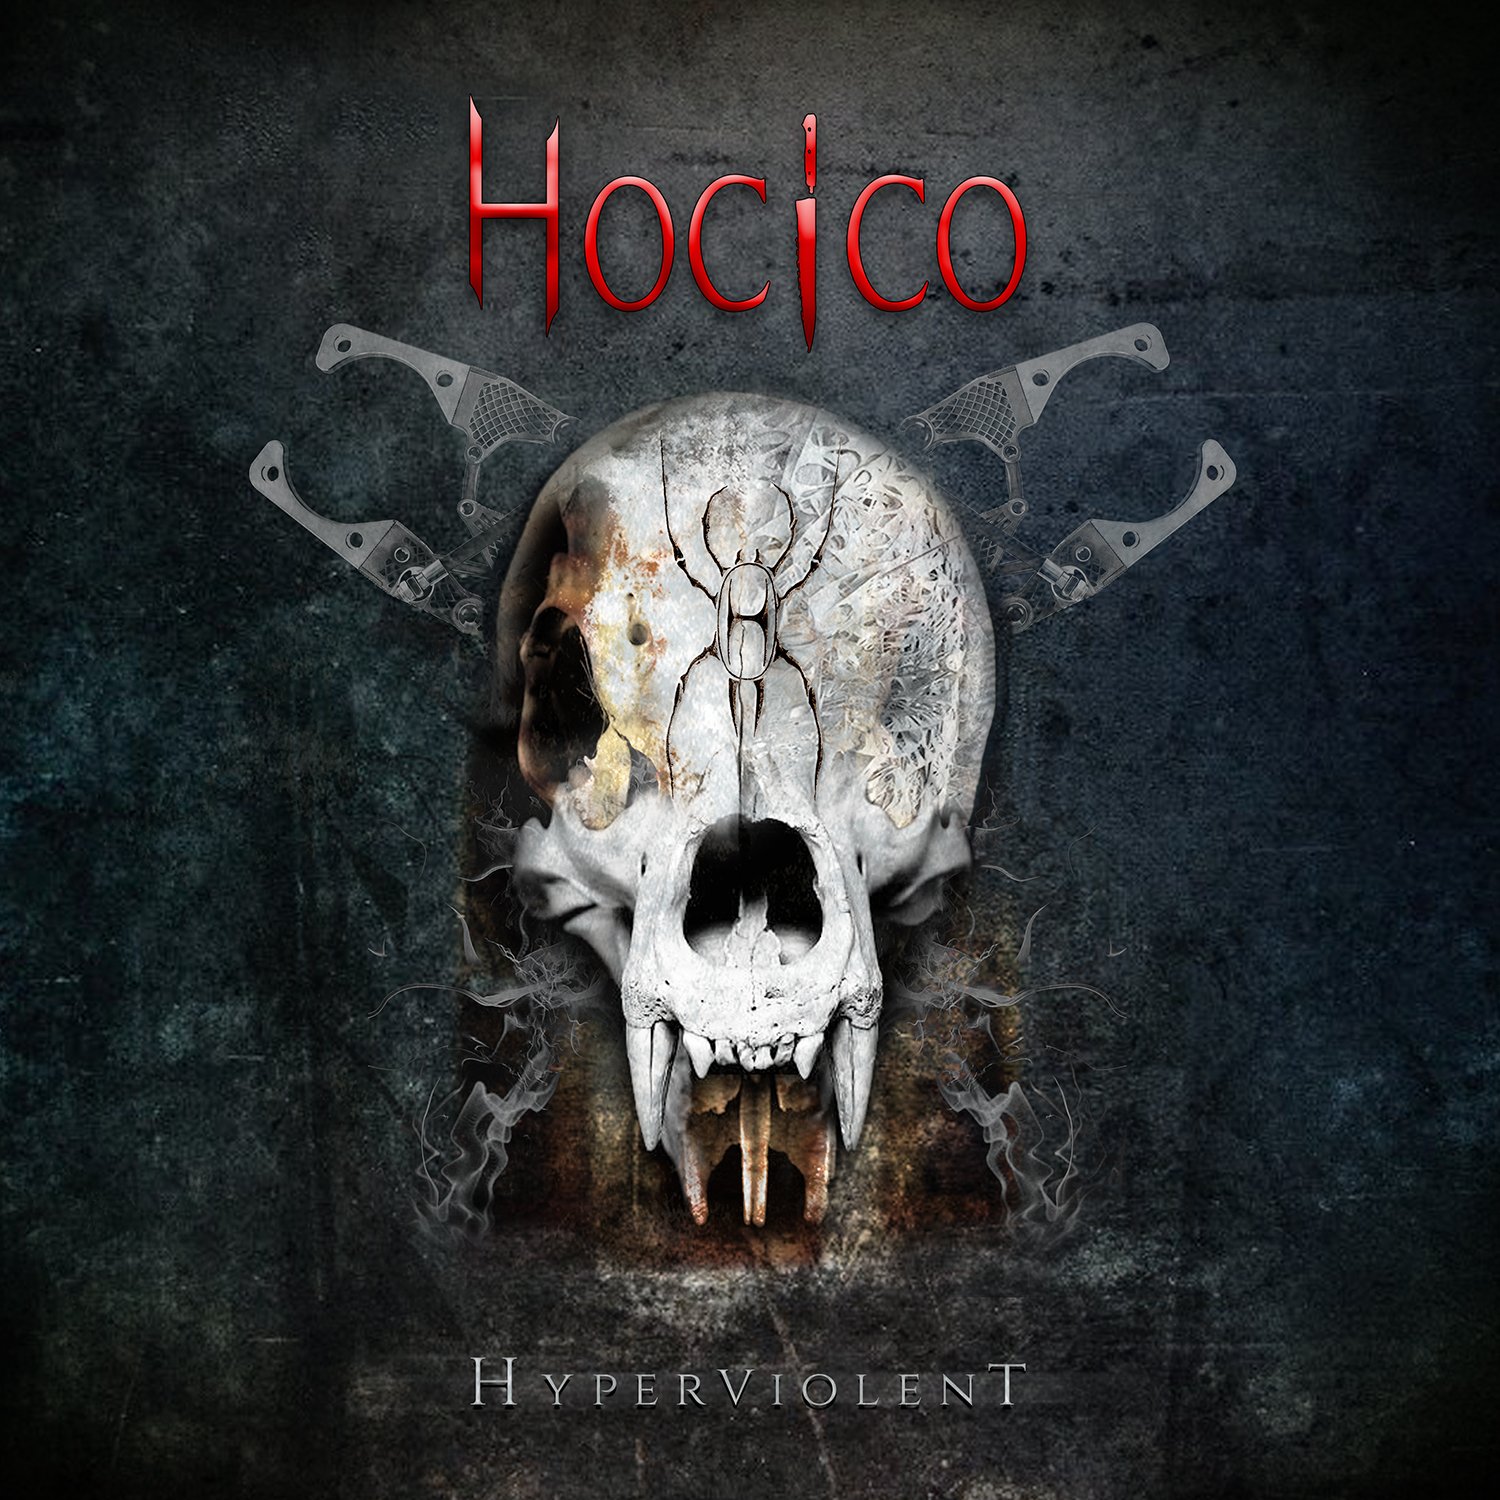 Hocico-HyperViolent-Deluxe Edition-2CD-FLAC-2022-FWYH Download